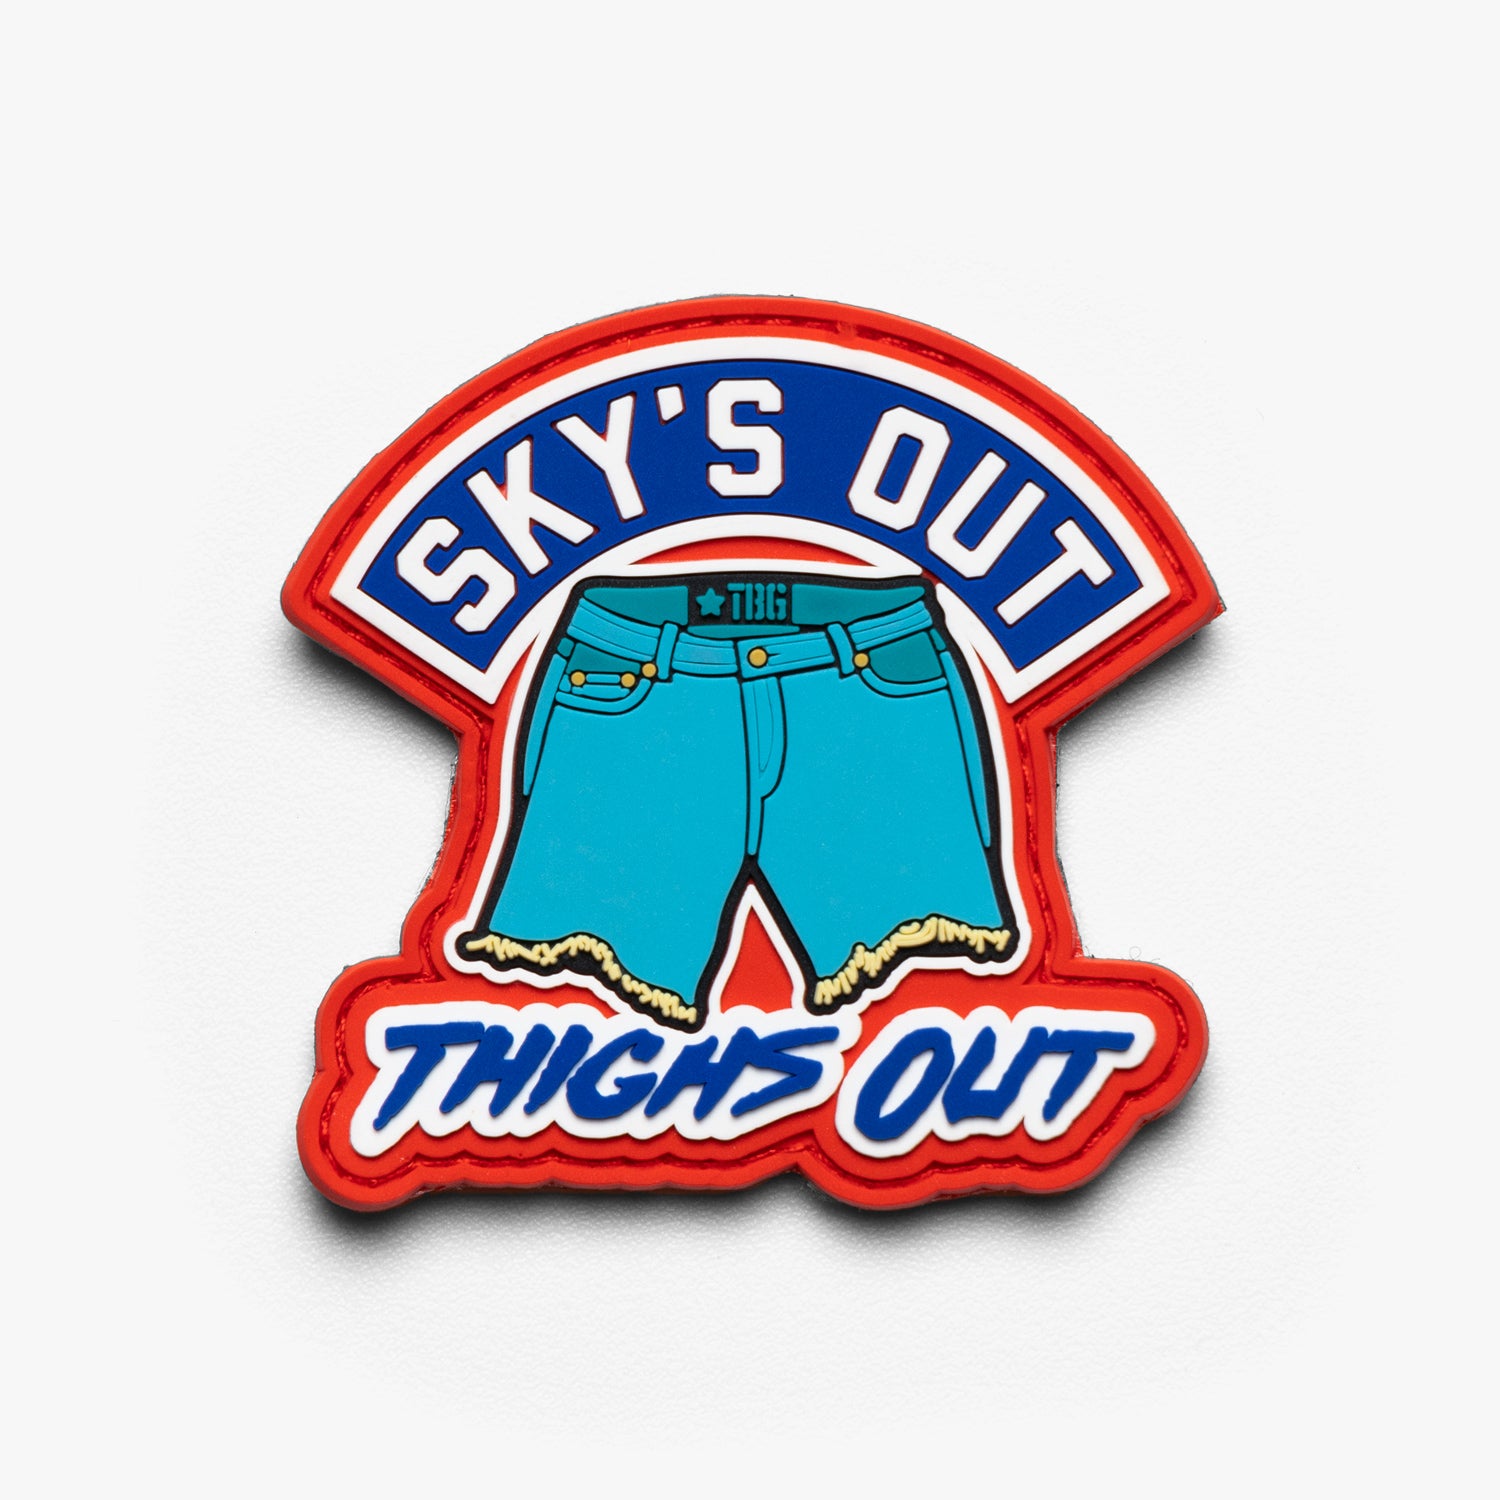 Sky's Out, Thighs Out Patch